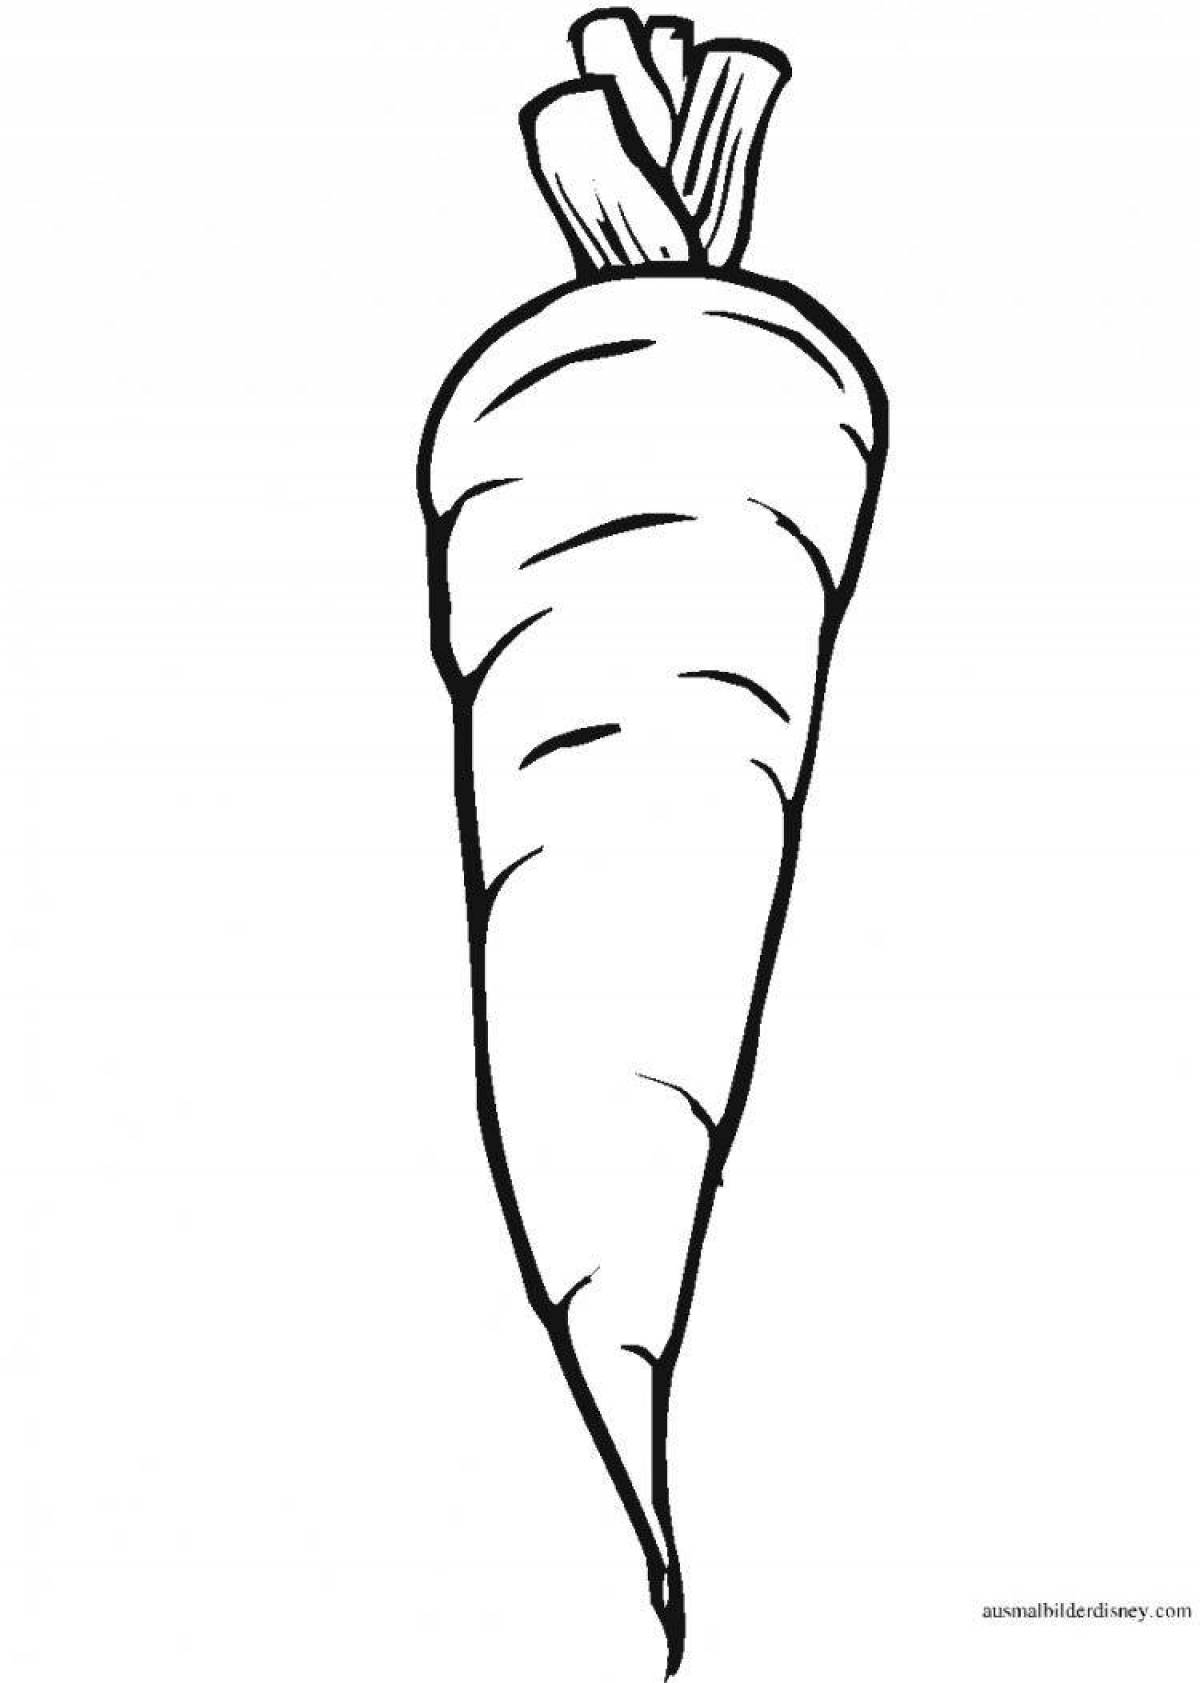 Coloring page dazzling carrot